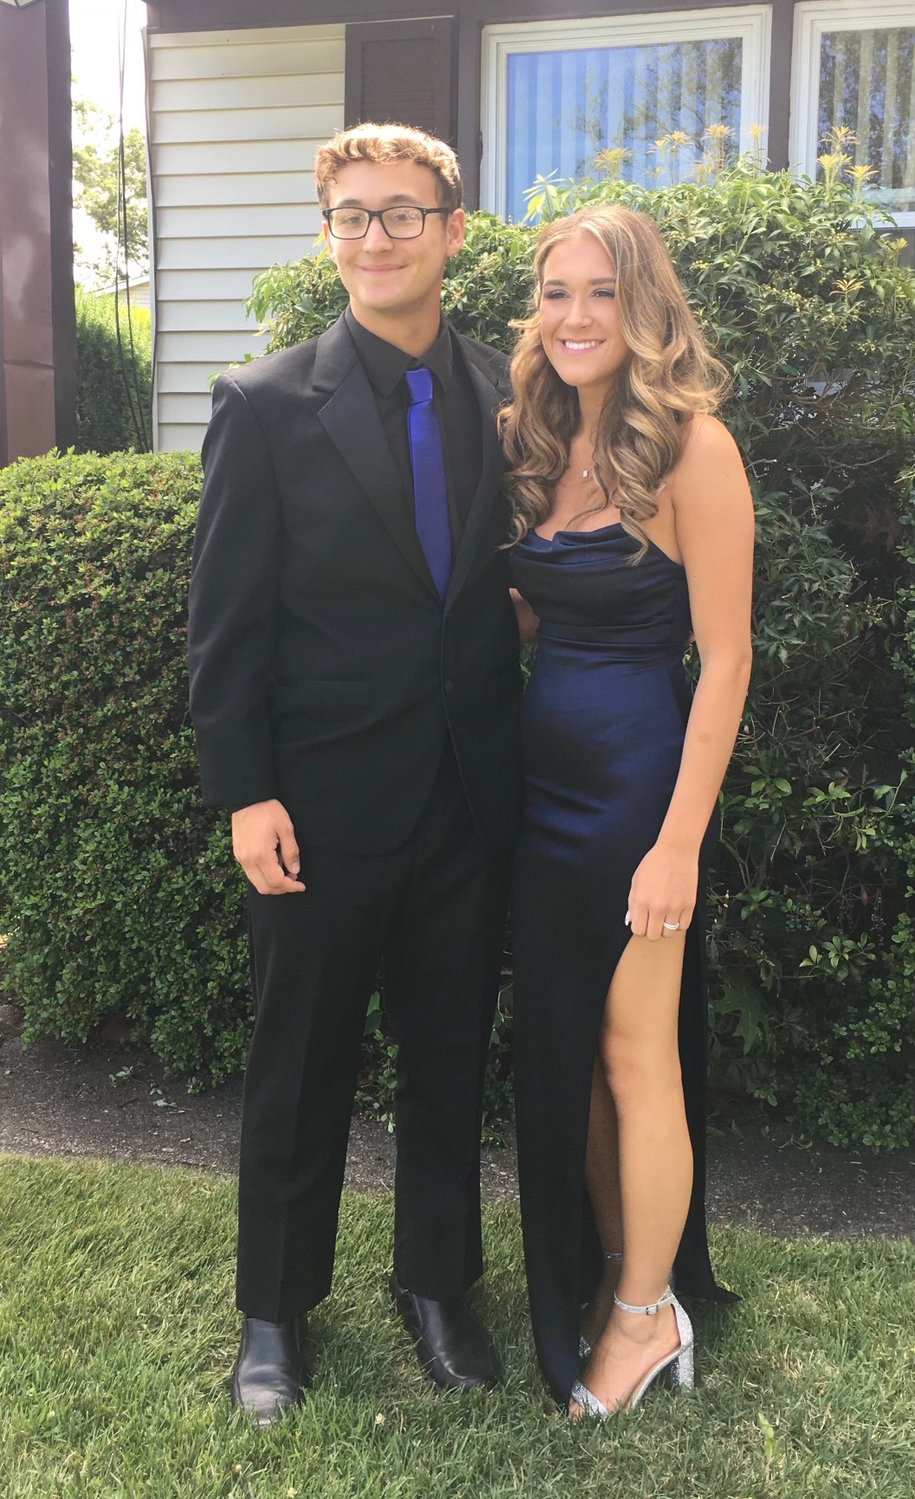 Dakota Michelini and Adeline Michelini, cousins that graduated from Islip High School and attended Islip prom.